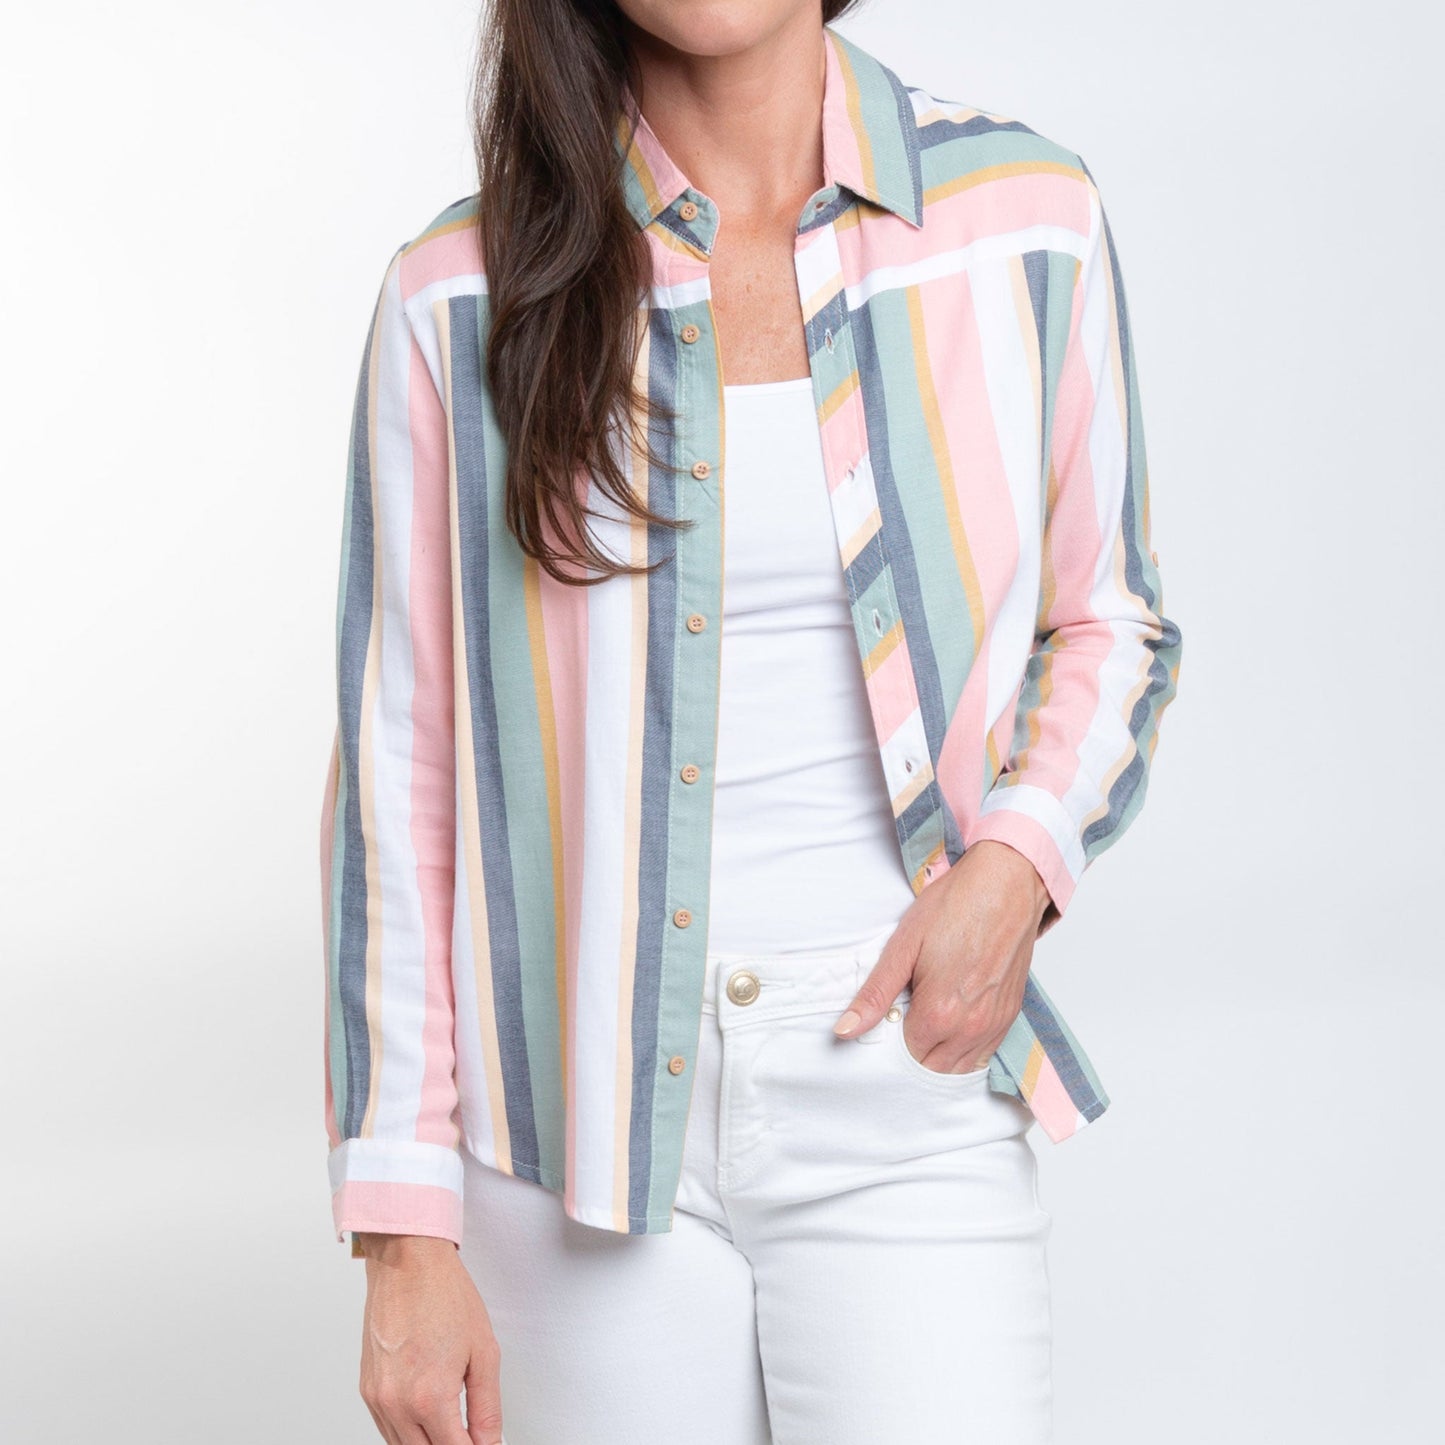 Sayla Button Up Top